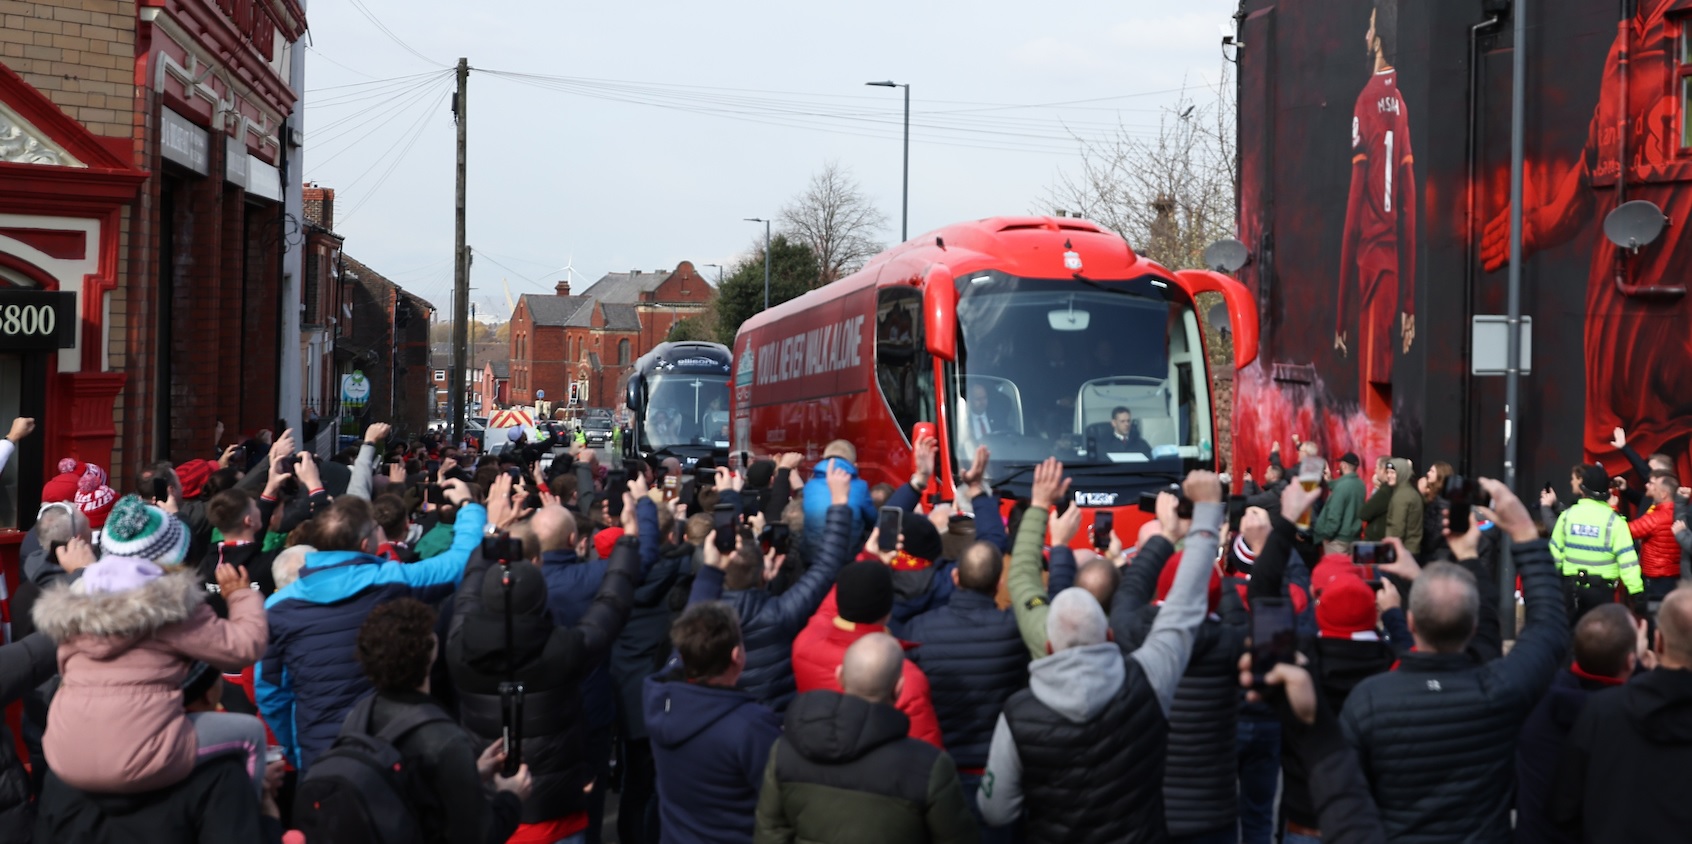 (Image) Mo Salah mural looks stunning in cool shot of Liverpool team coach en route to Anfield